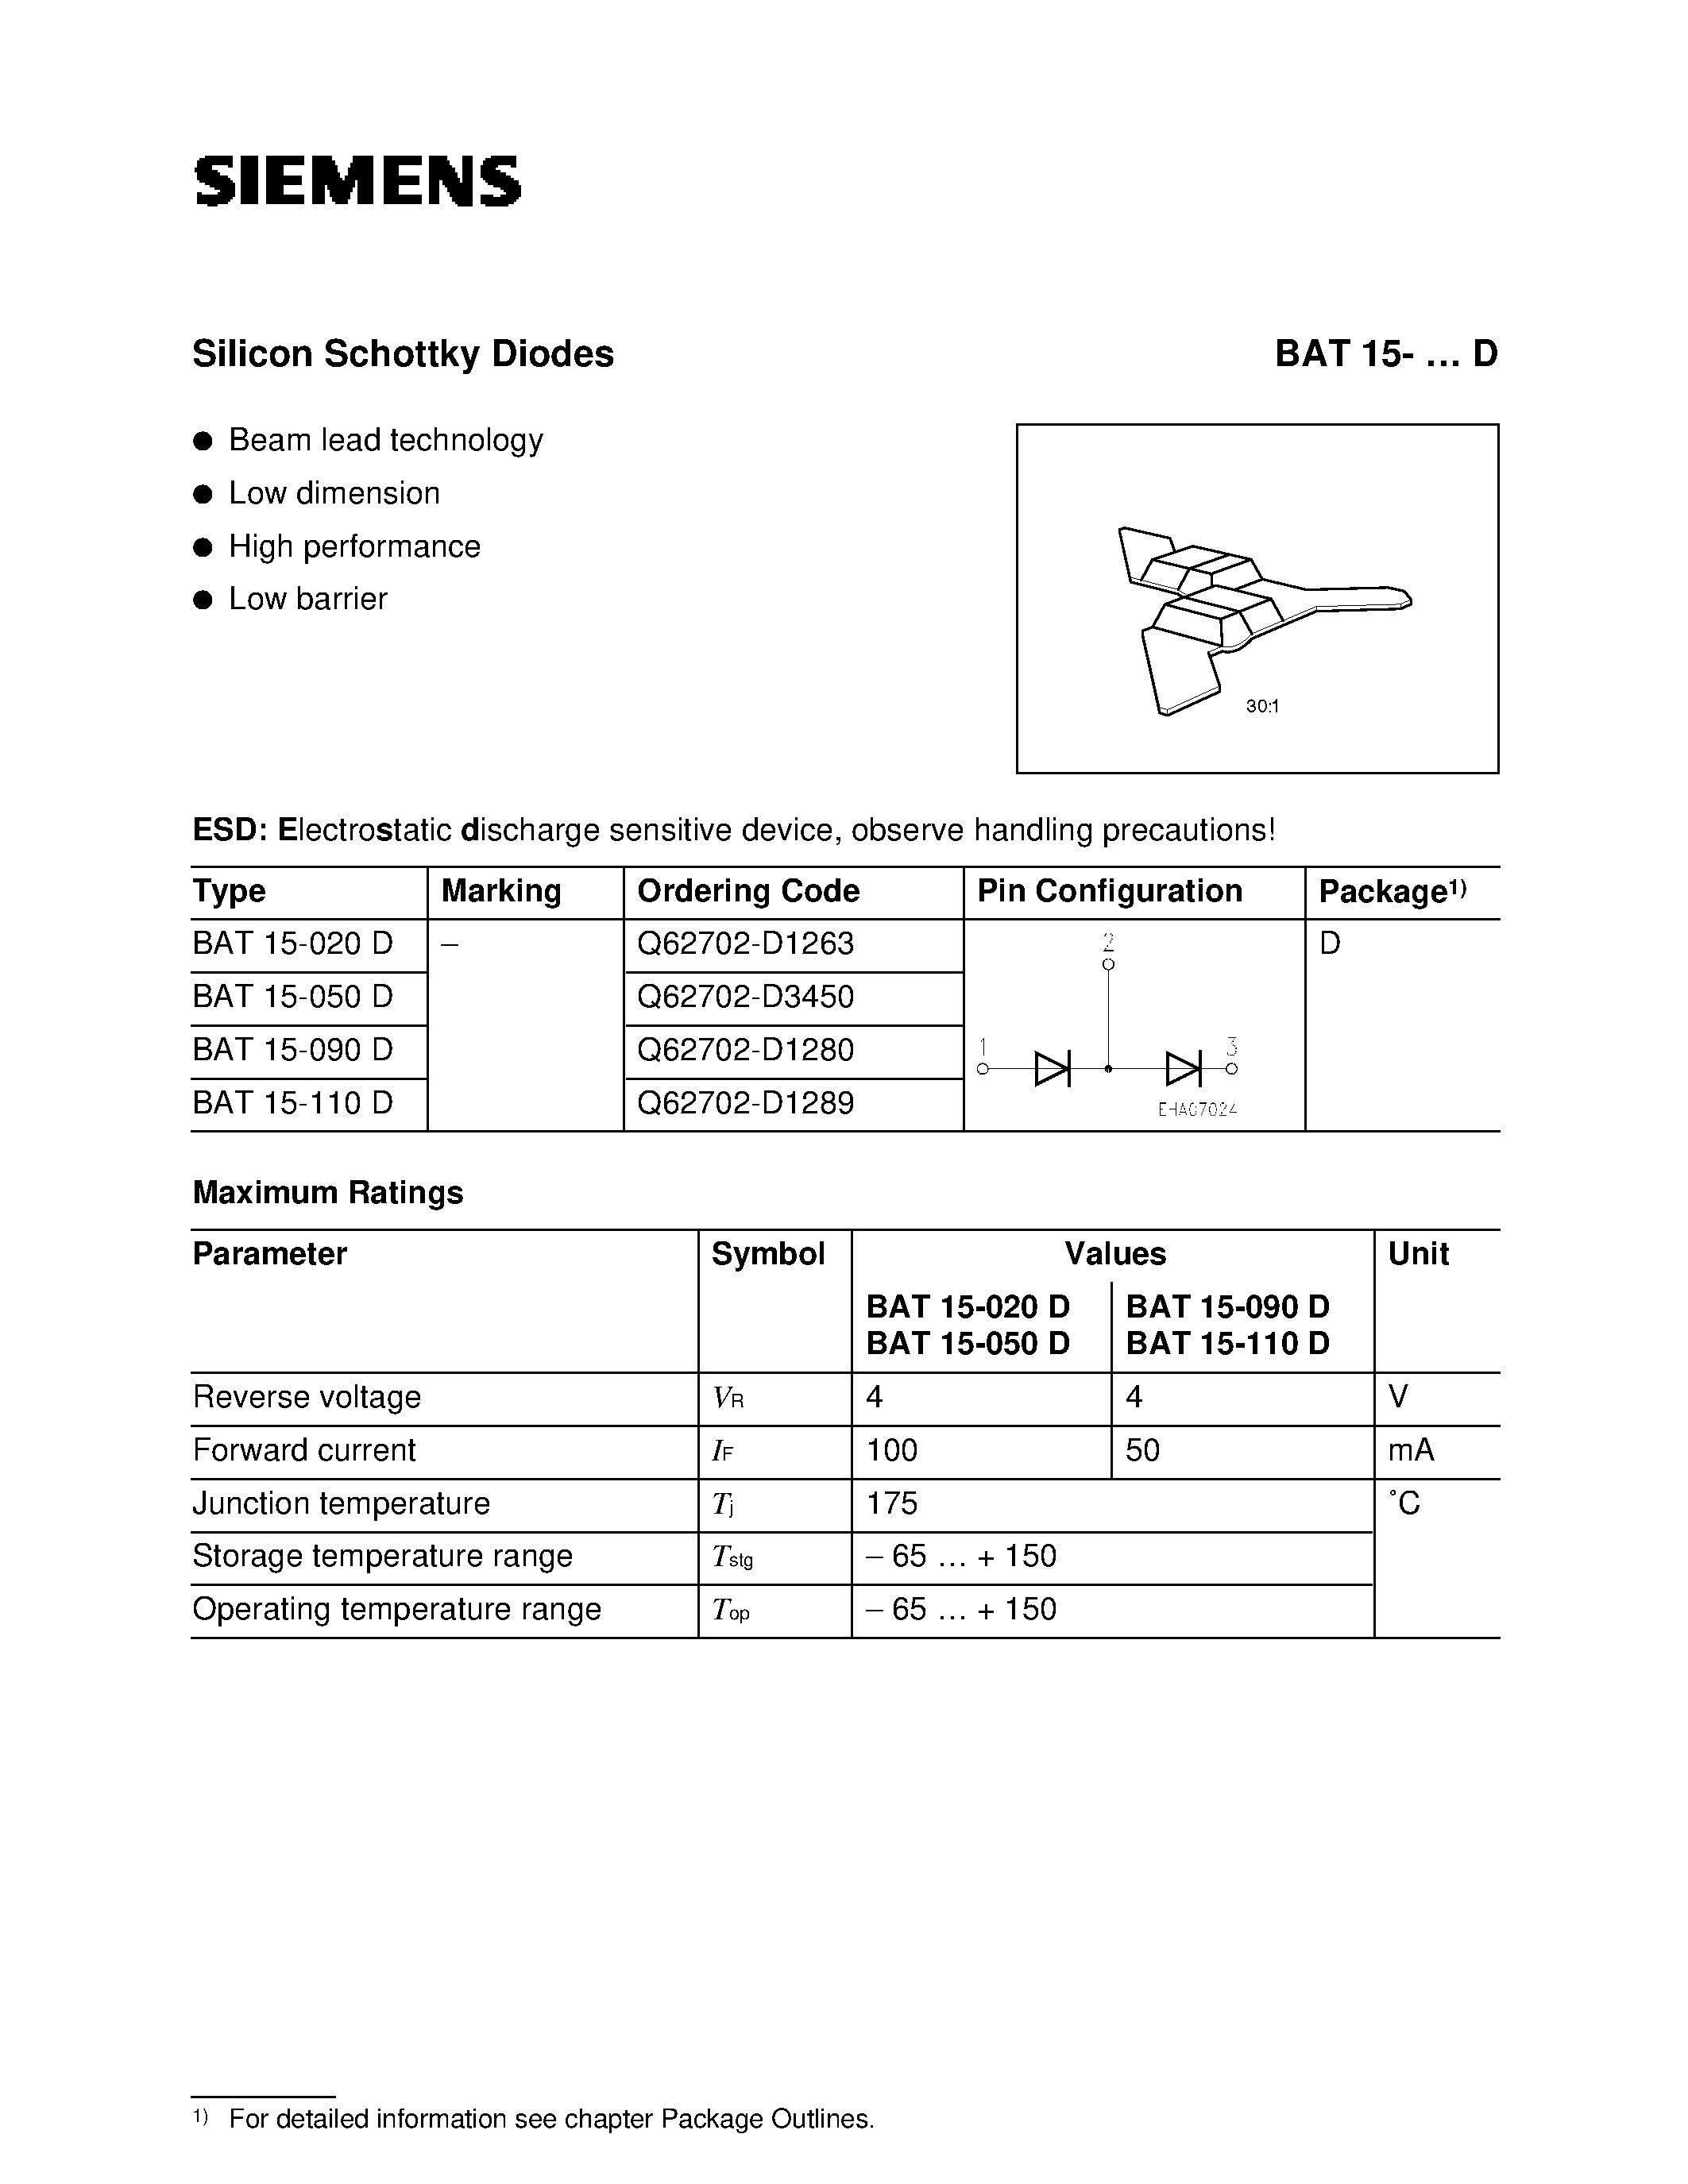 Datasheet BAT15-110D - Silicon Schottky Diodes (Beam lead technology Low dimension High performance Low barrier) page 1